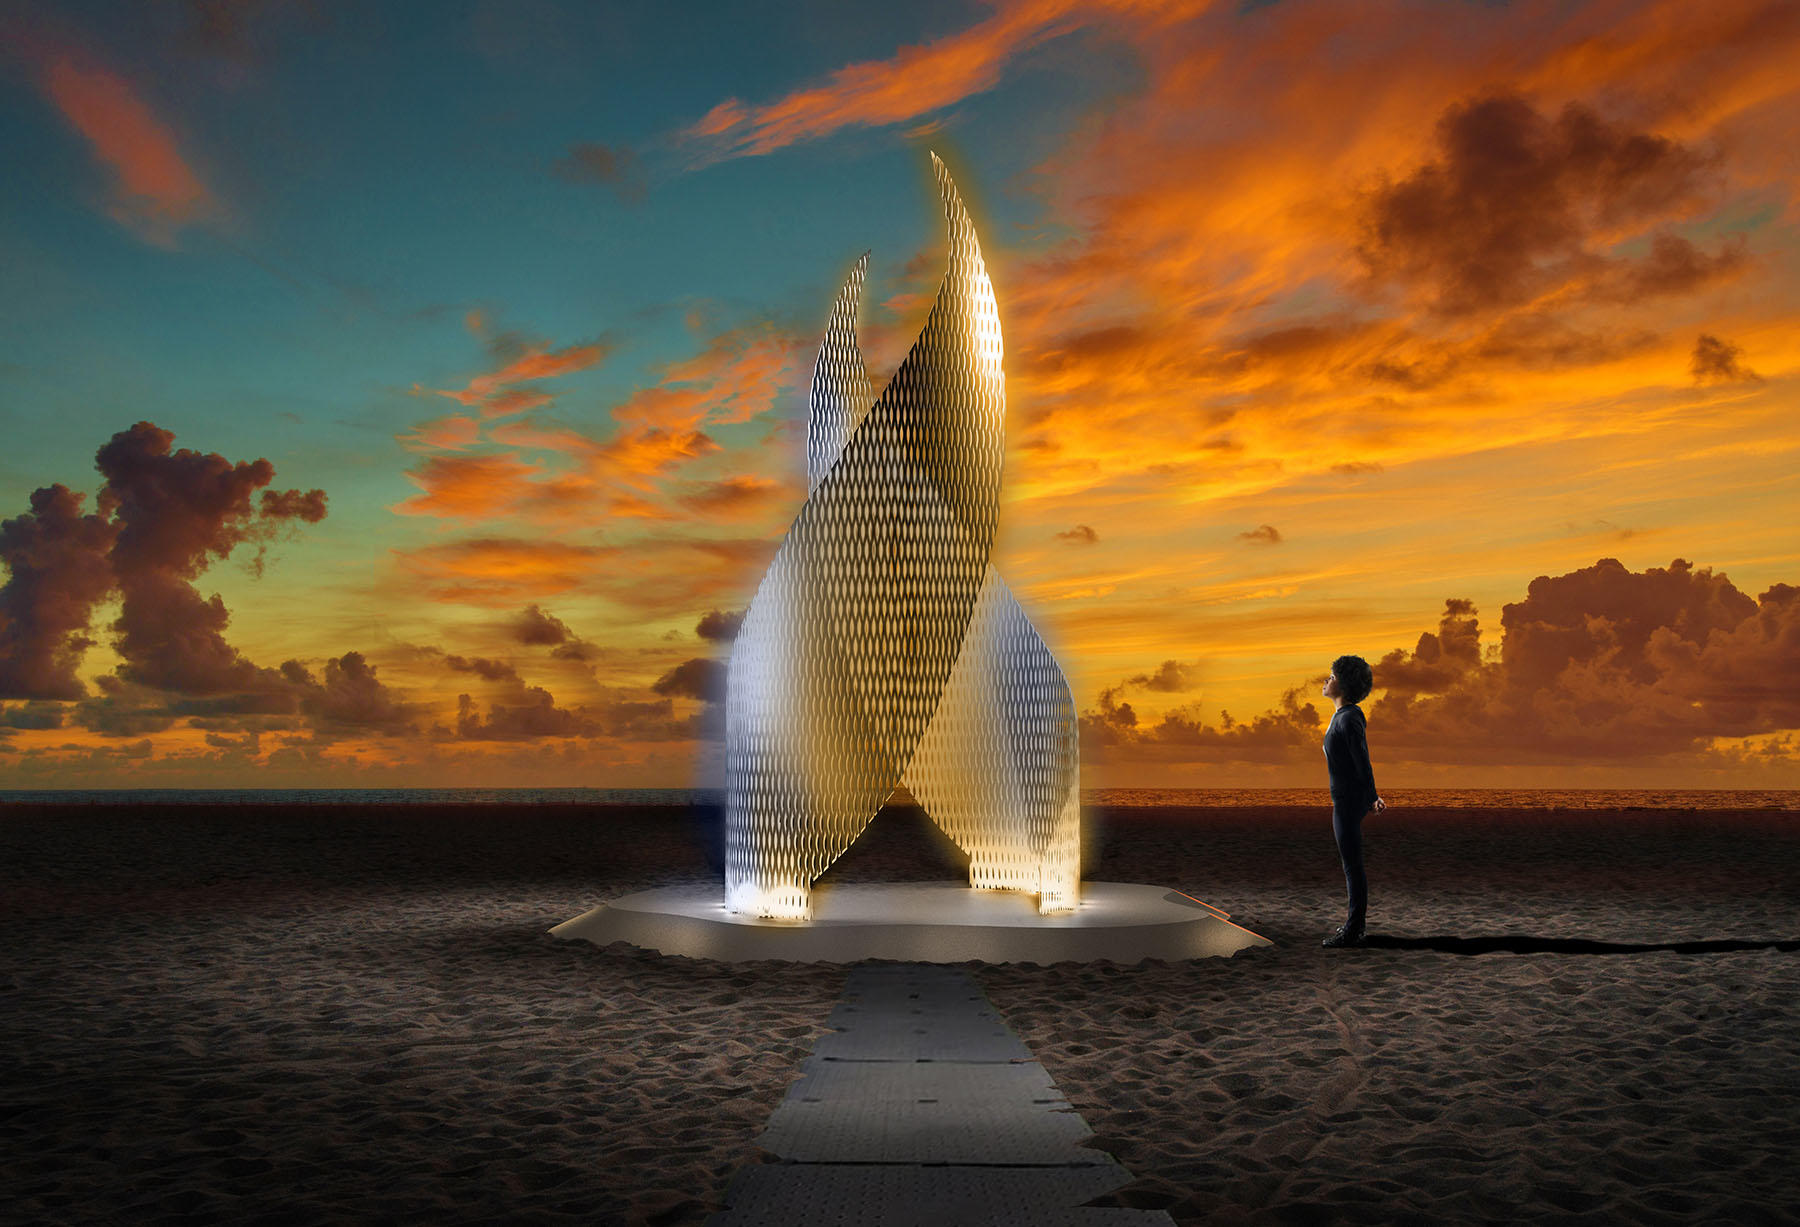 An artist rendering of a spiraling monumental public sculpture with a woman looking up at it for scale 